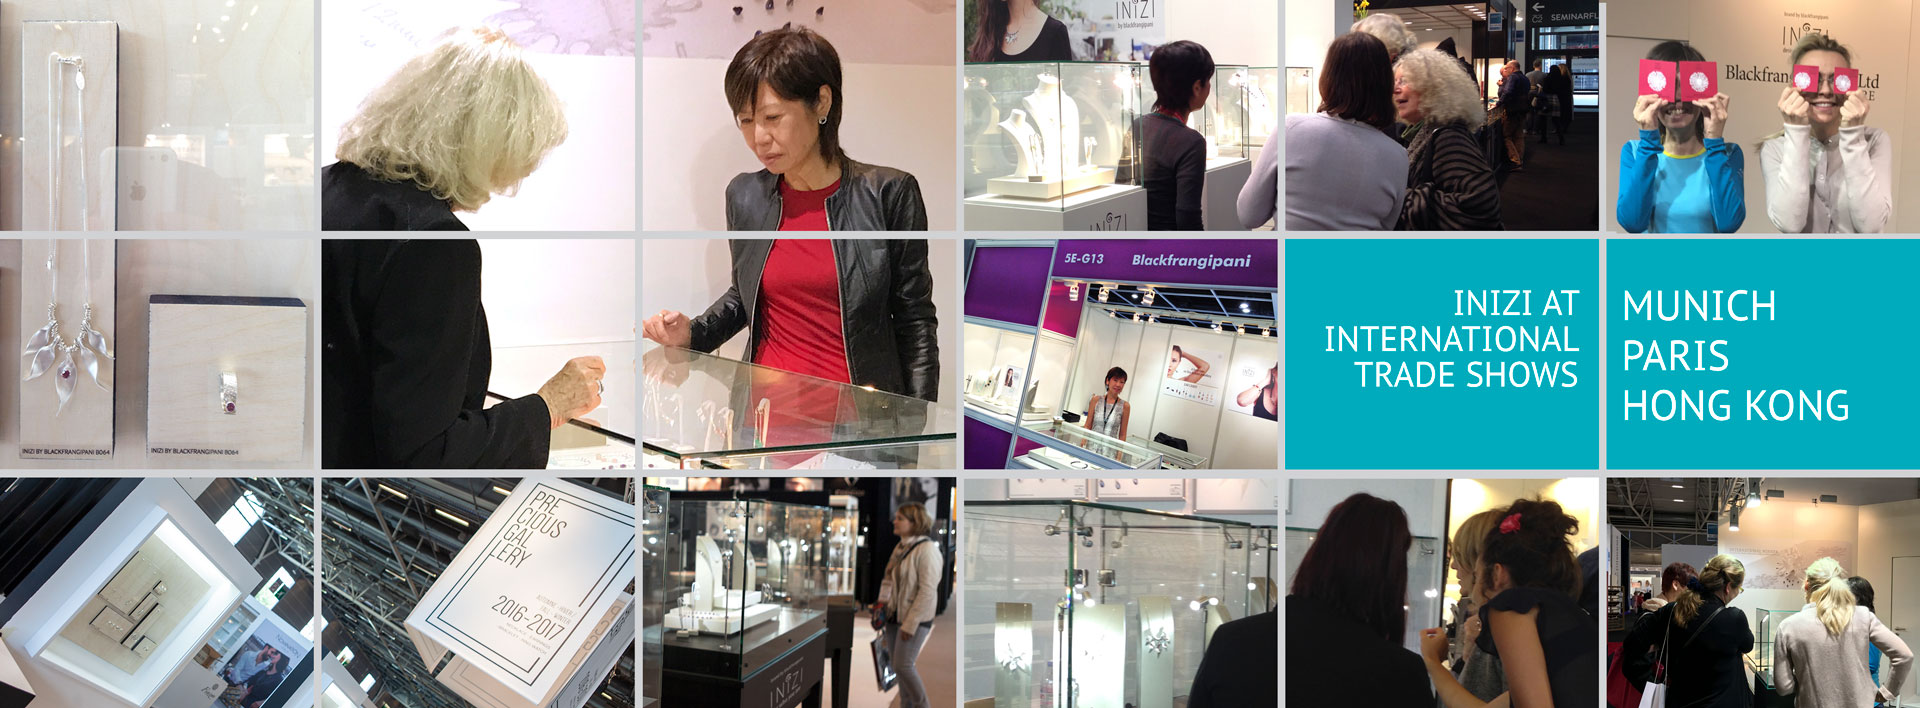 INIZI at International Jewellery Trade Shows in Munich, Paris and Hong Kong.